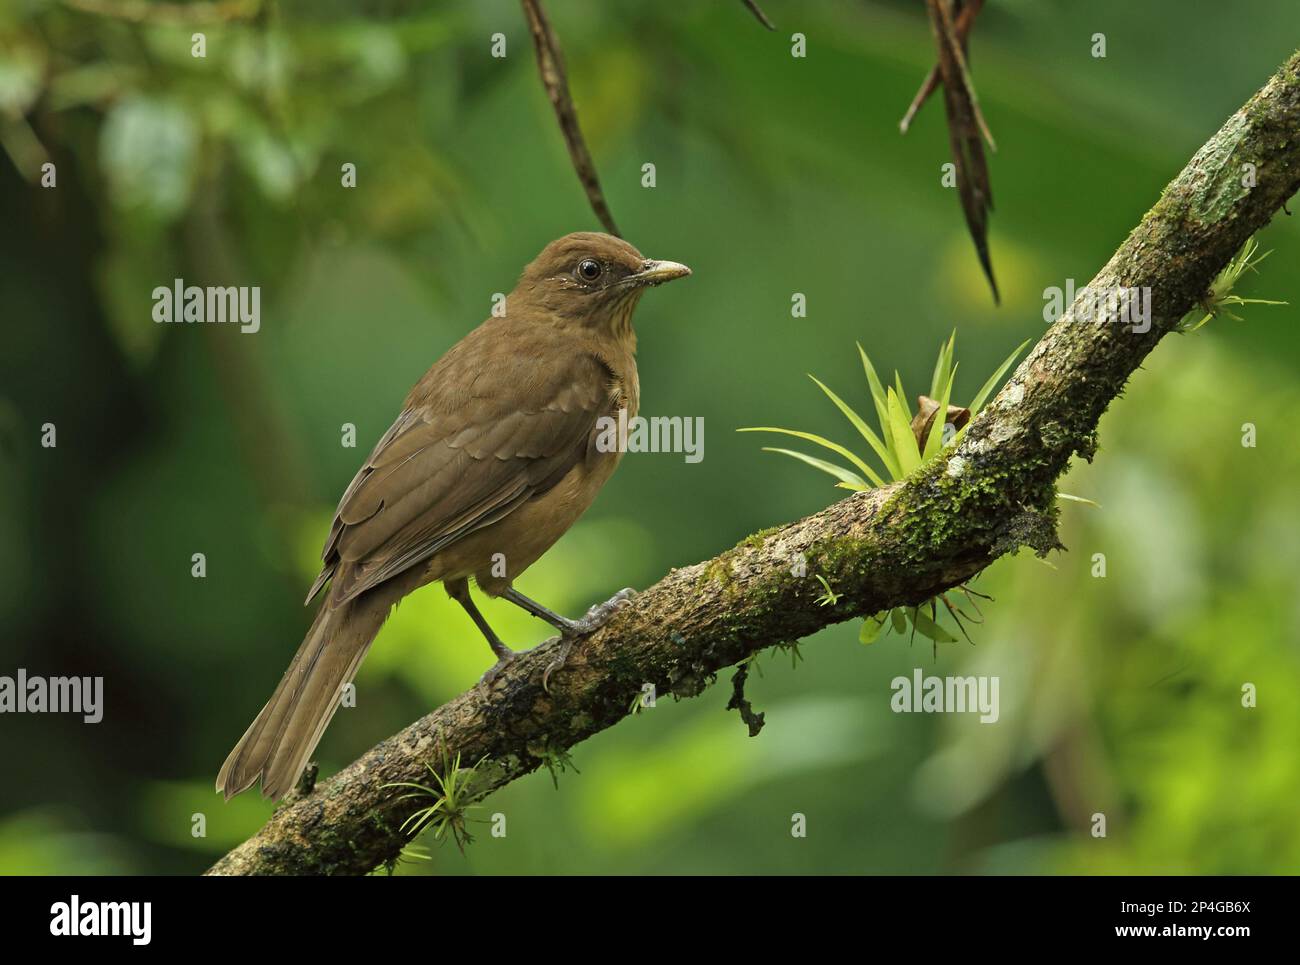 Clay-coloured robin (Turdus grayi casius) adult, sitting on a branch, Canopy Lodge, El Valle, Panama Stock Photo